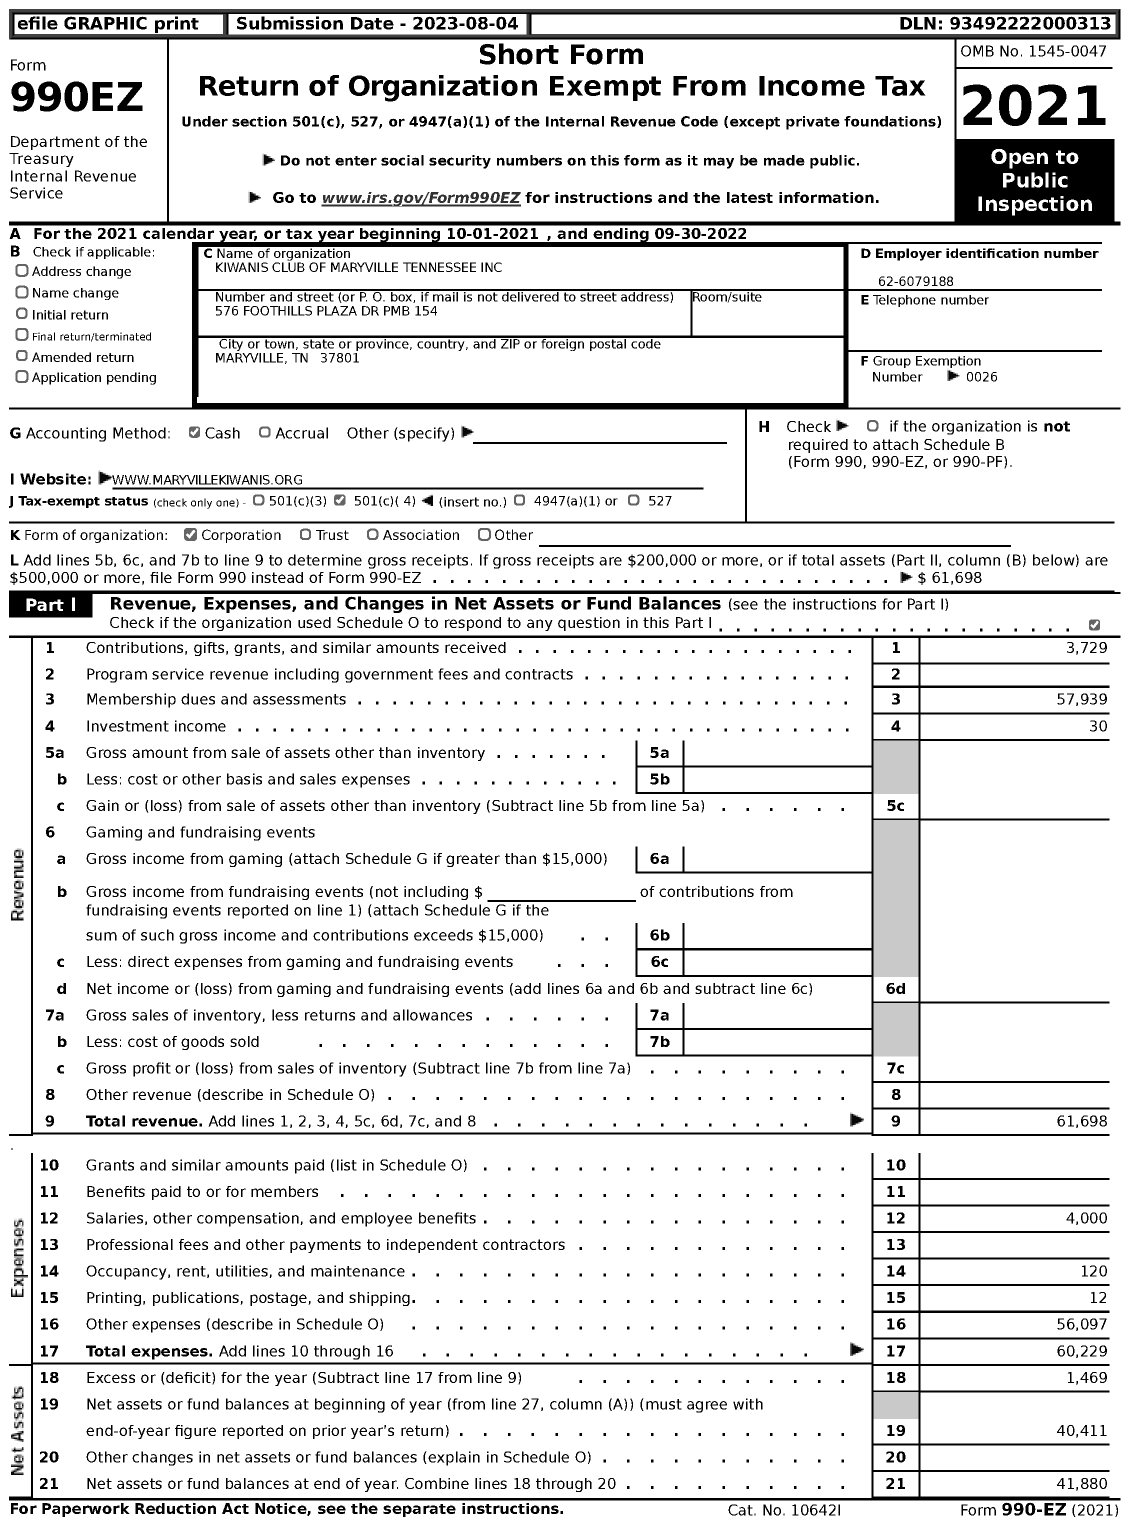 Image of first page of 2021 Form 990EZ for Kiwanis International - K00190 Maryville